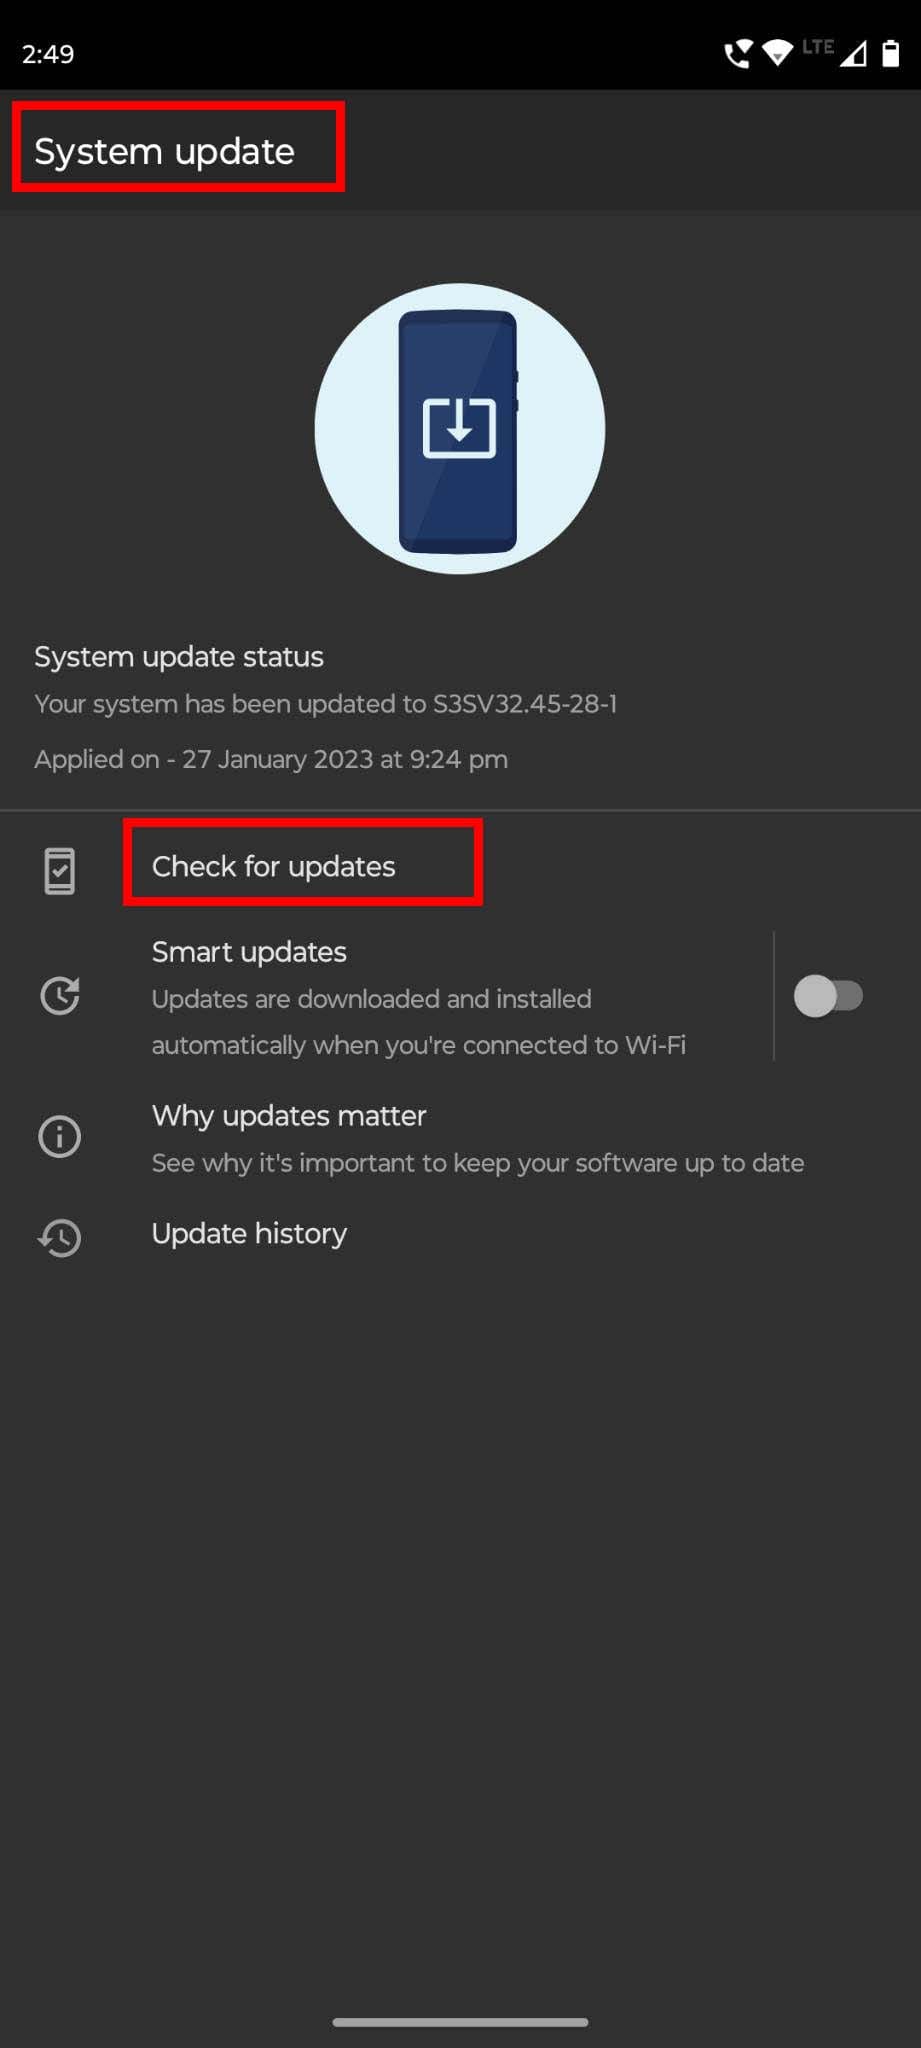 How to do a forced system update on Android